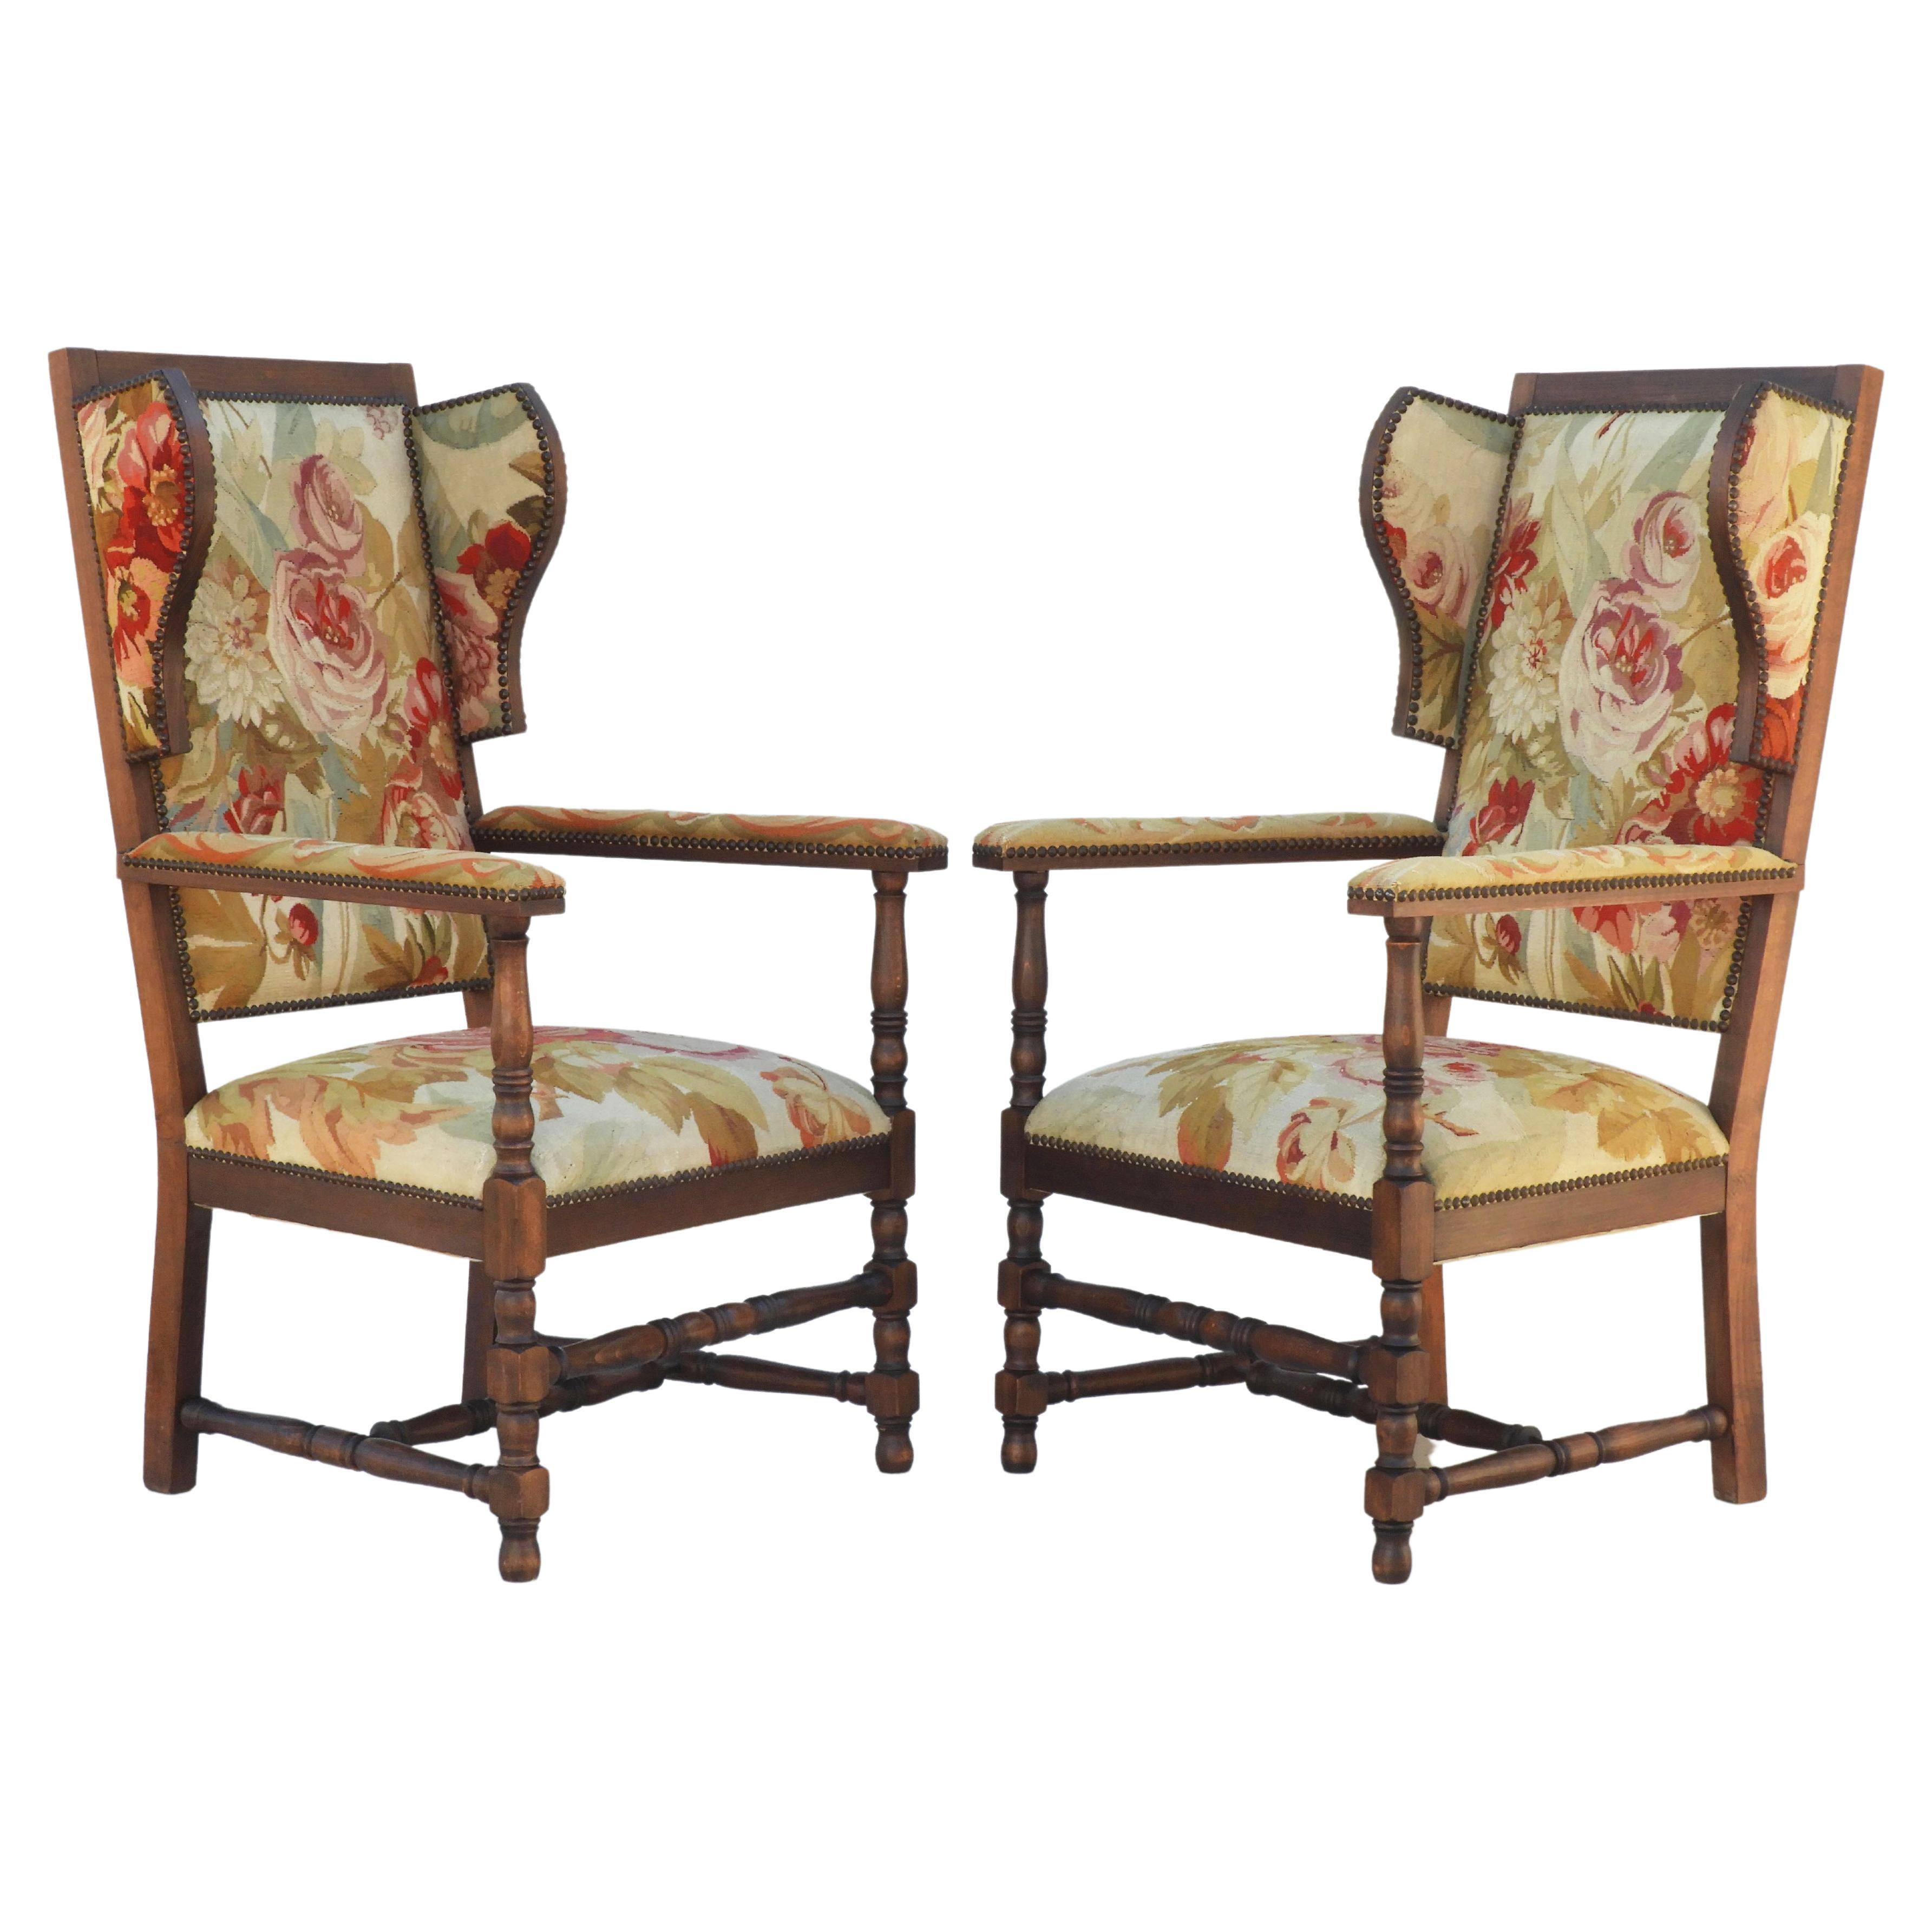 Pair of French Provincial Oak and Tapestry Wing back Armchairs